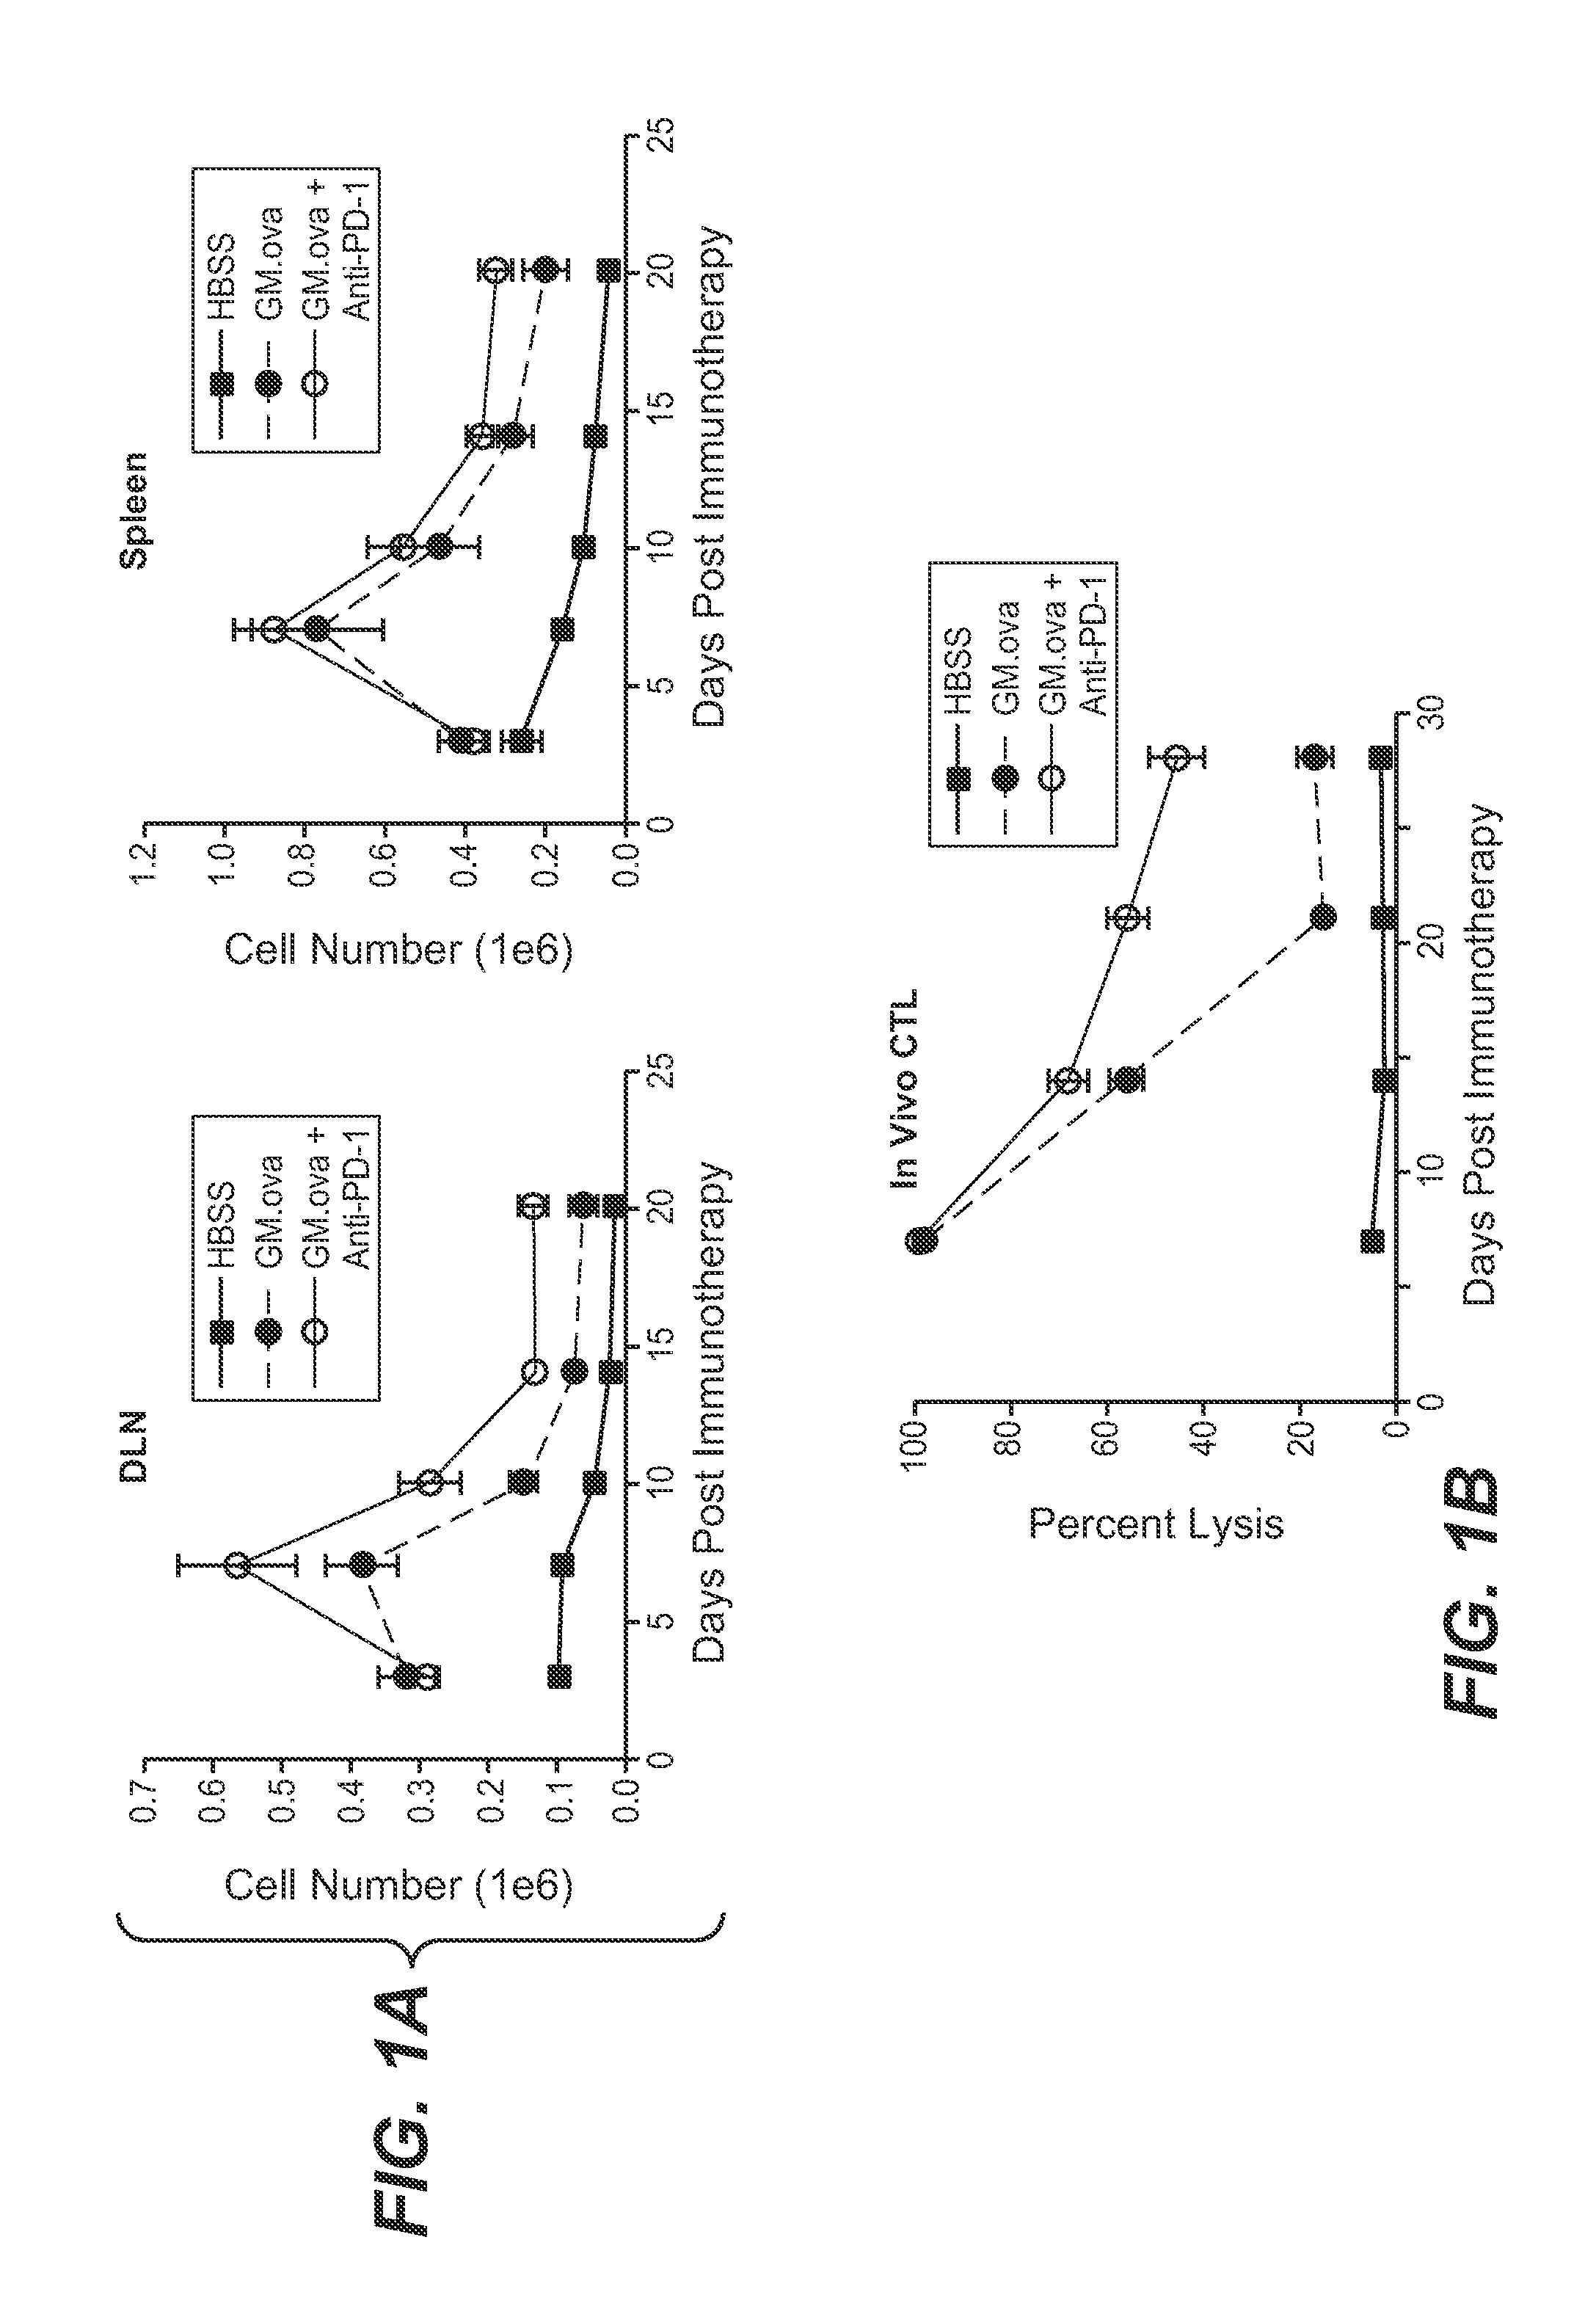 Pd-1 antibodies in combination with a cytokine-secreting cell and methods of use thereof